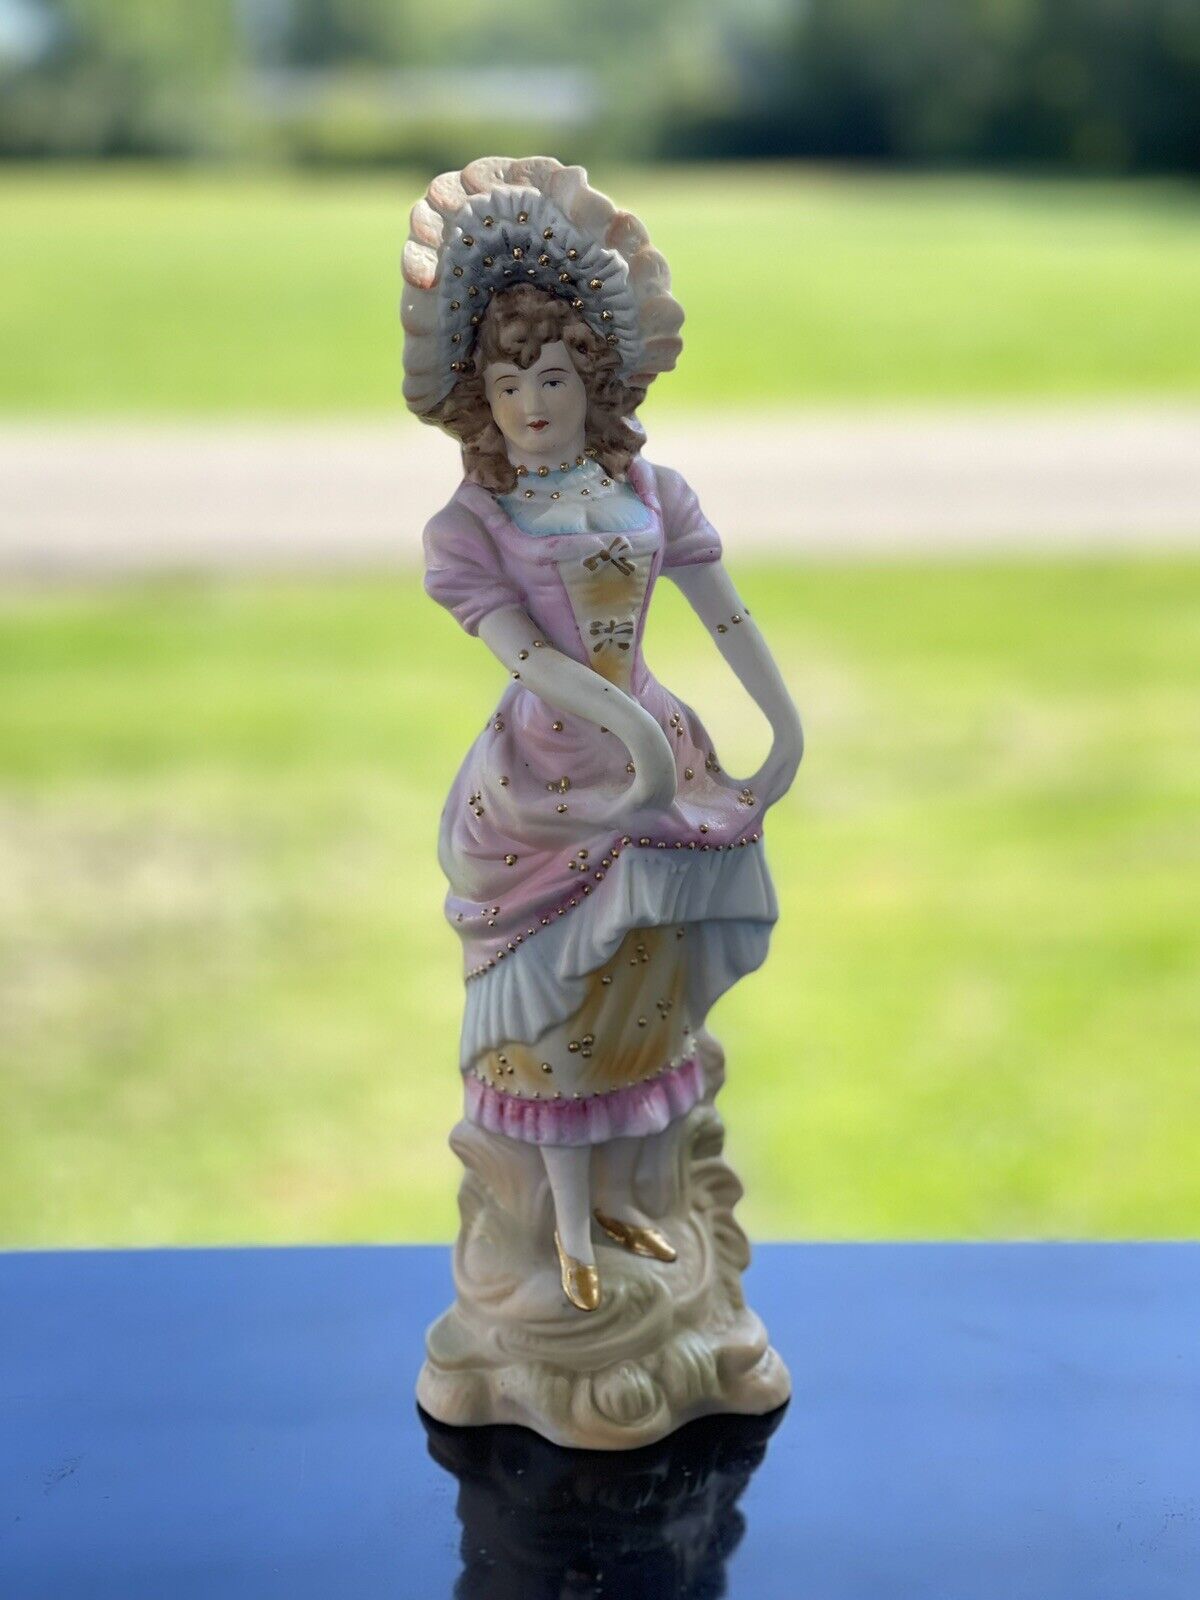 Vintage Colonial Lady Figurine Hand Painted Victorian Style Women